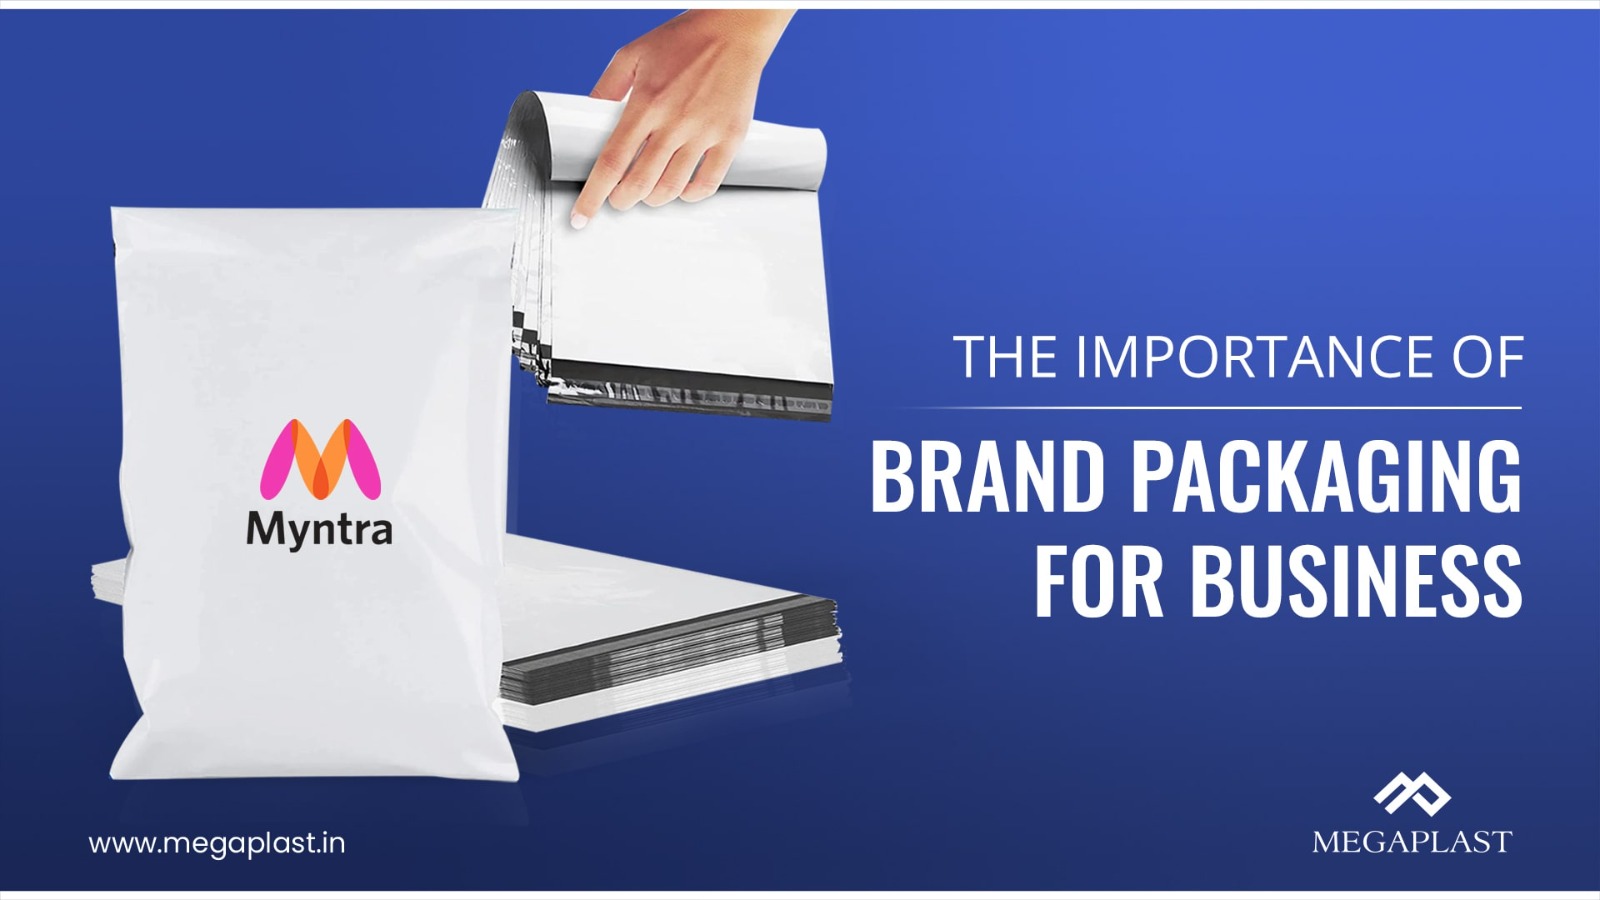 The Importance of Brand Packaging for Business